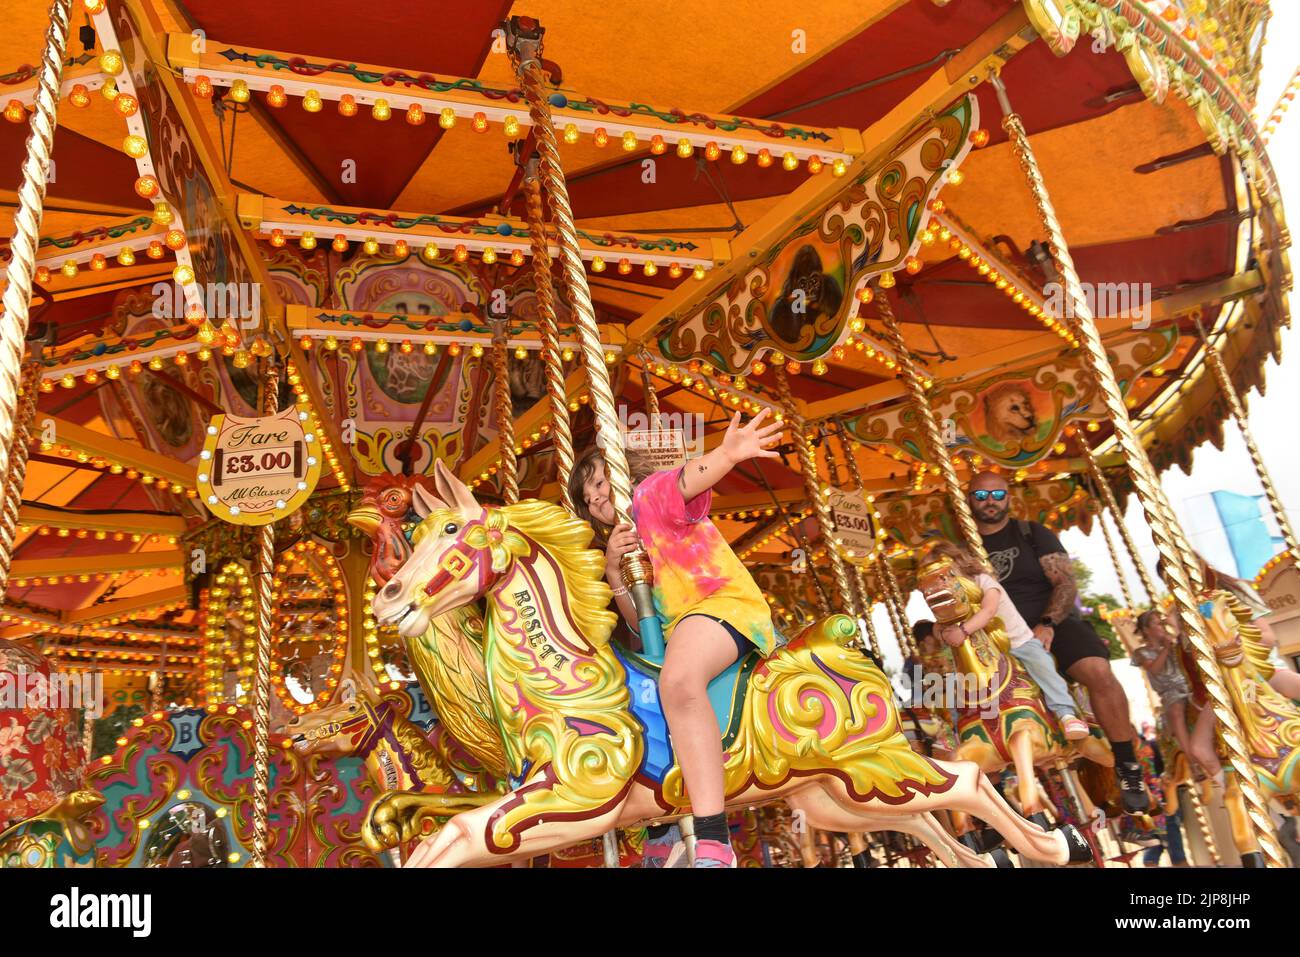 A carousel, also known as a merry-go-round. Scenes at the family friendly festival Camp Bestival, Lulworth Castle and Estate, Dorset UK July 28 - 31 2022 Stock Photo